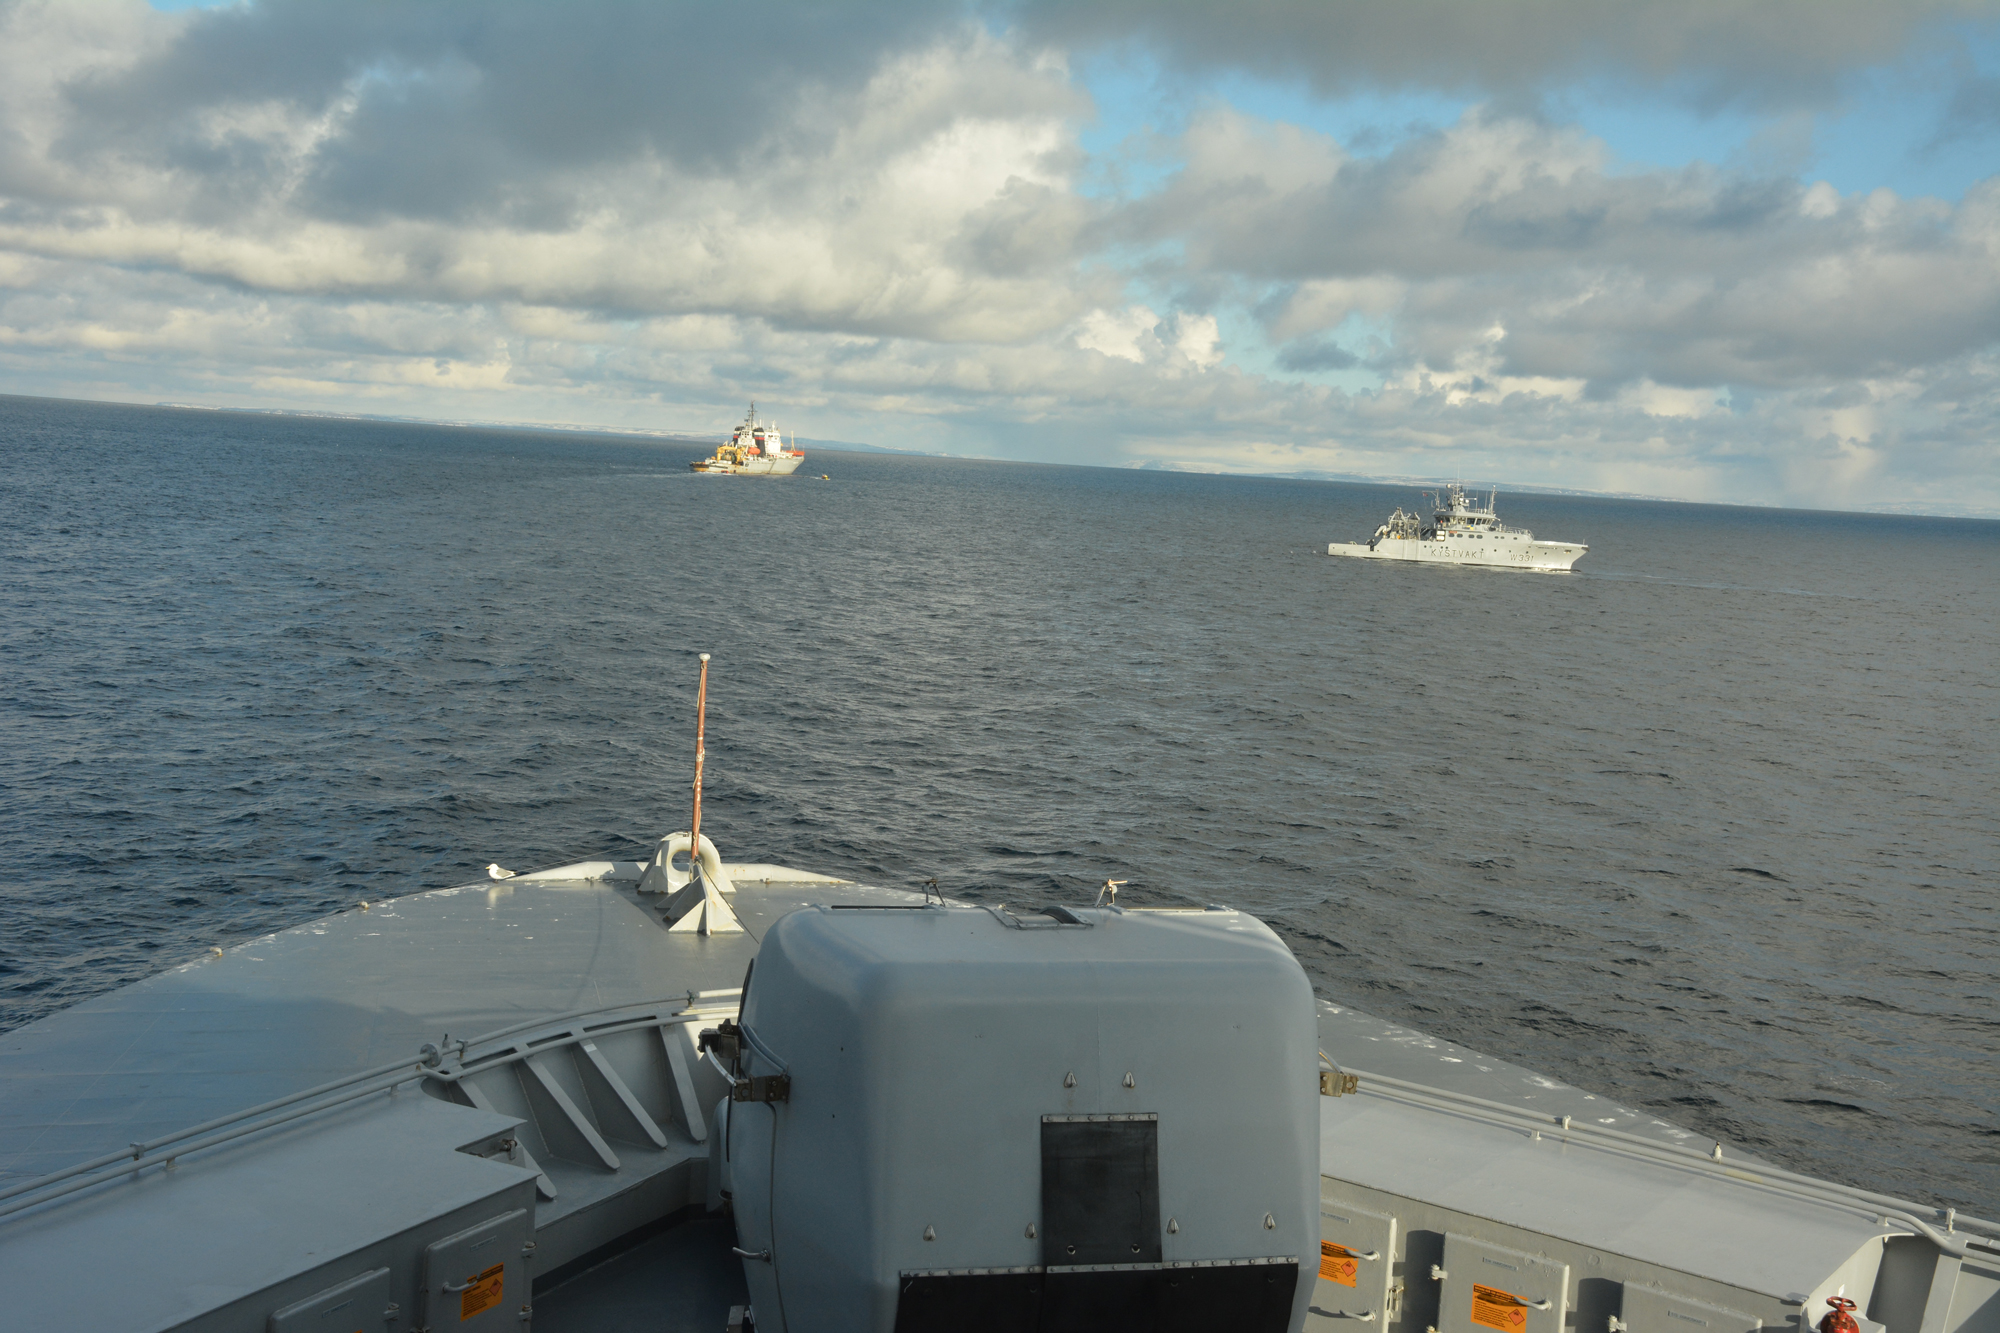 Norwegian and Russian coast guard vessels jointly take part in Exercise Barents. (Atle Staalesen / The Independent Barents Observer)